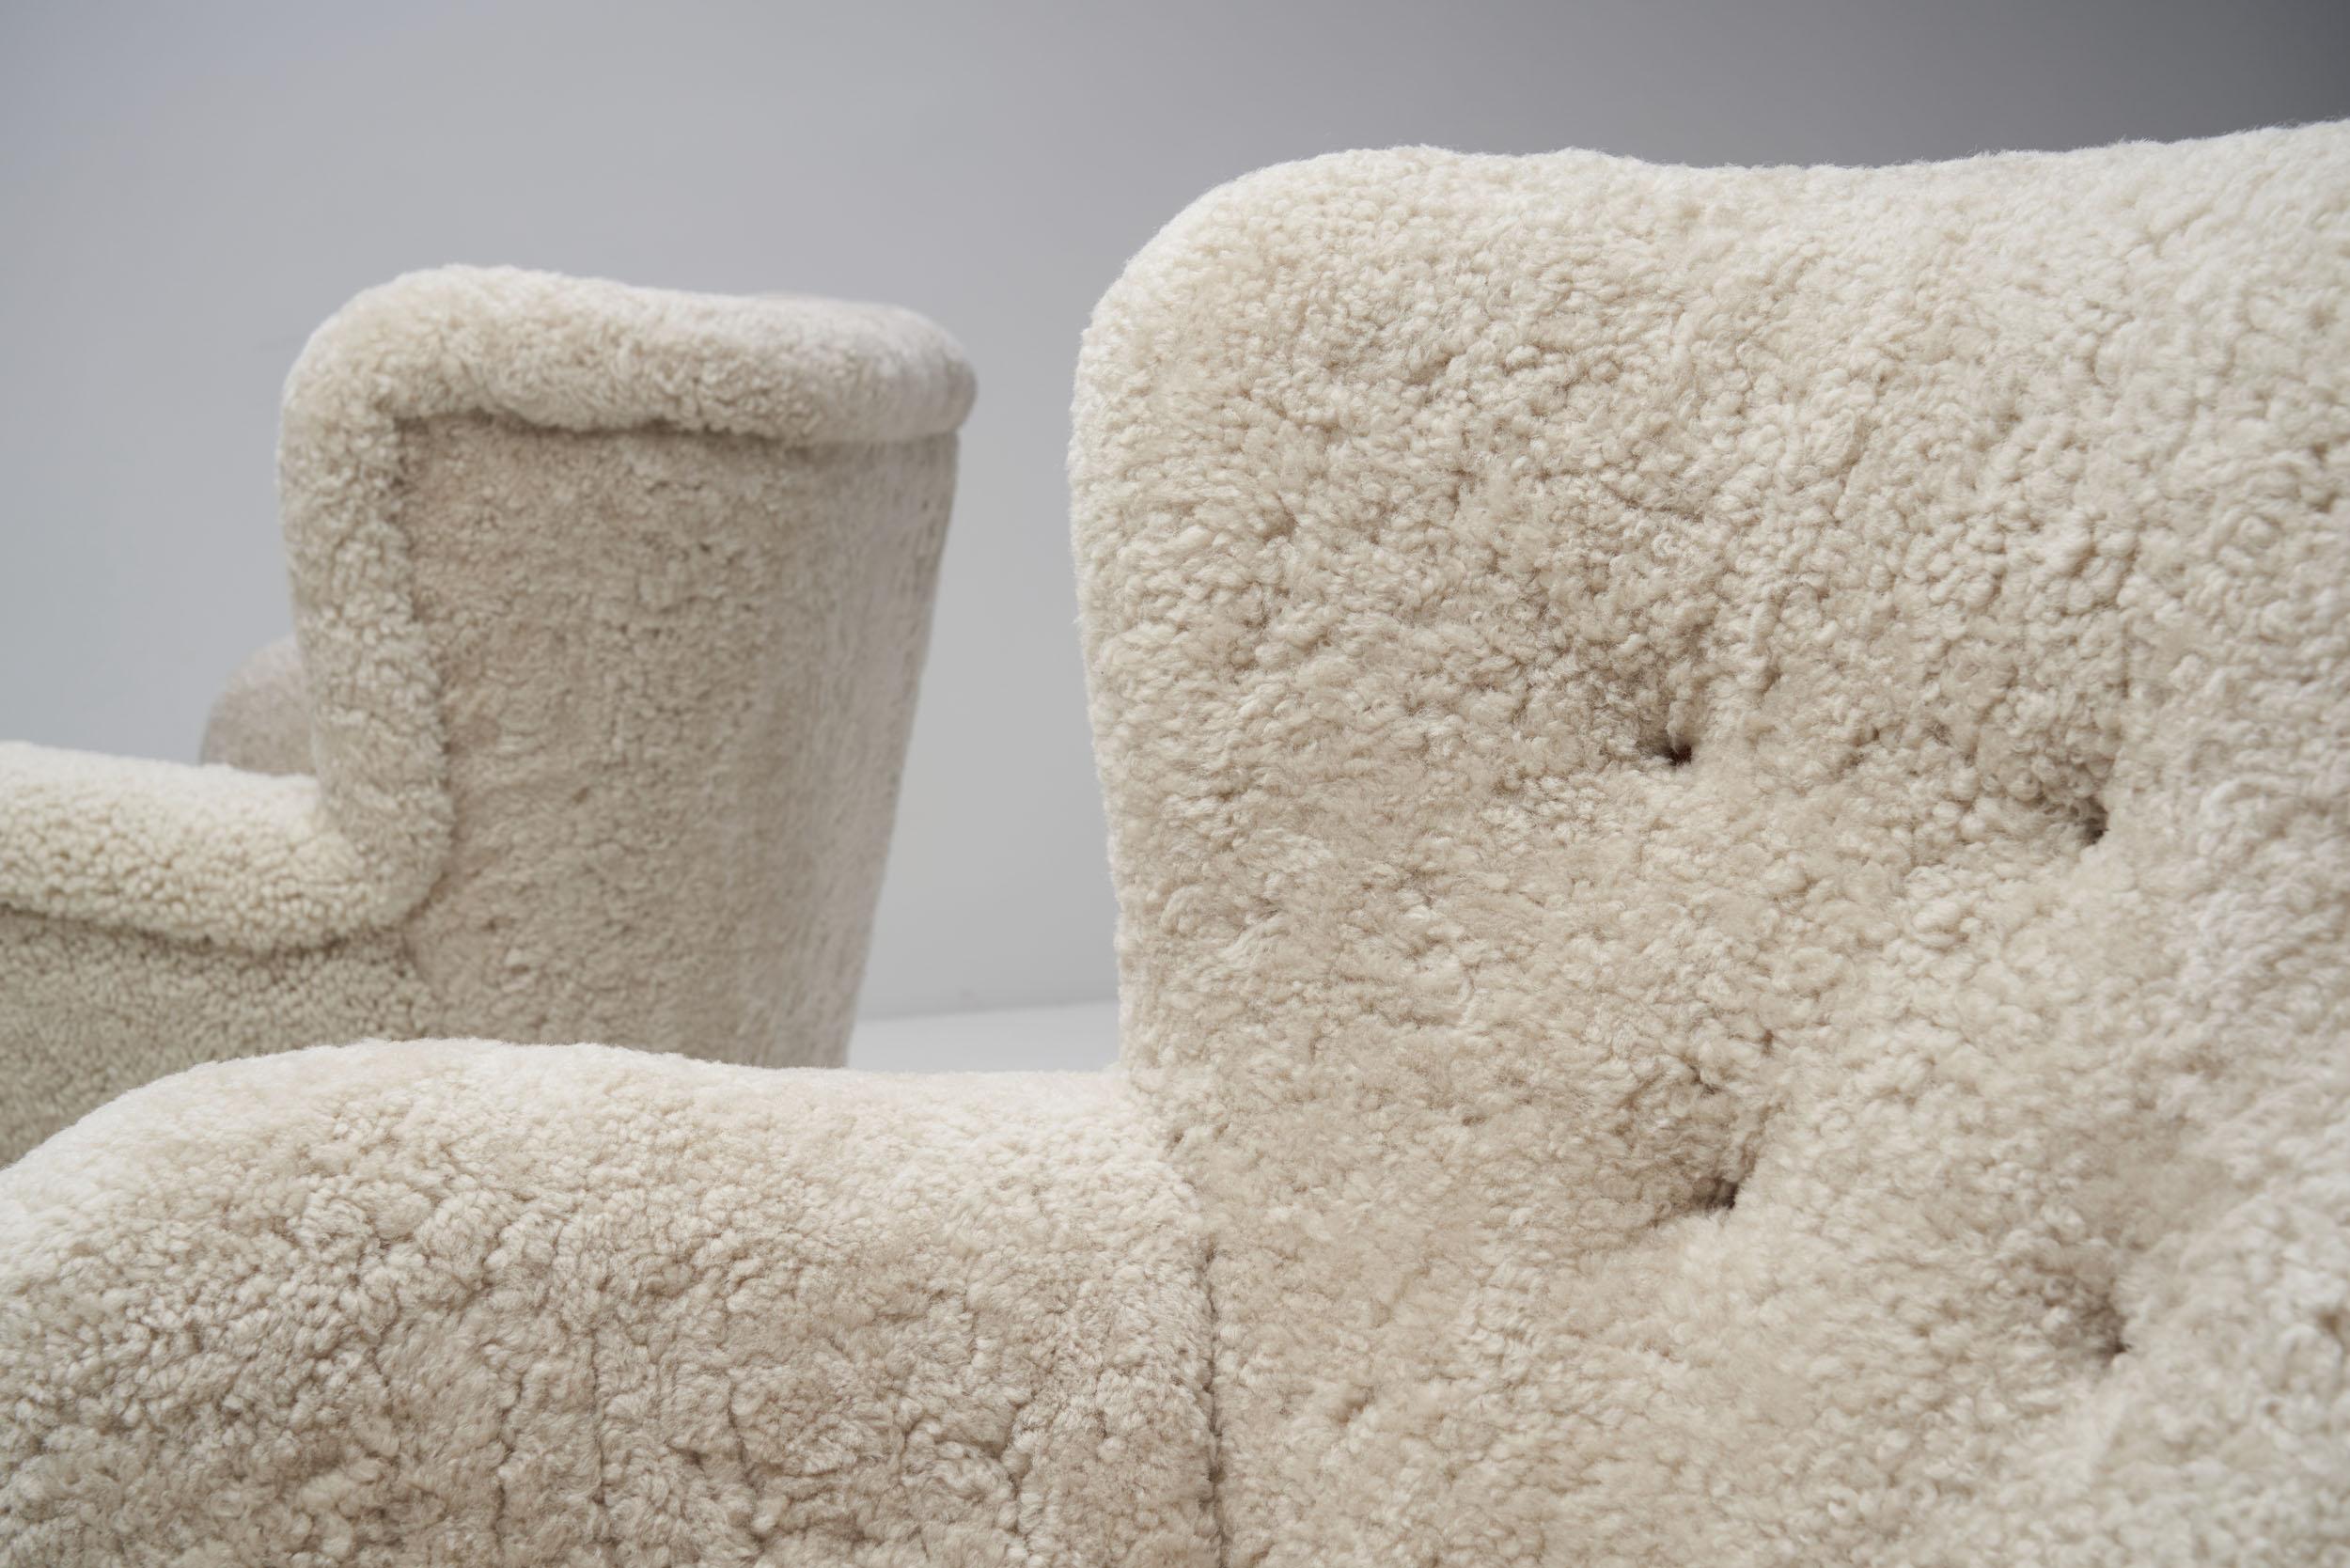 Pair of “Laila” Armchairs in Sheepskin by Ilmari Lappalainen, Finland 1948 For Sale 4